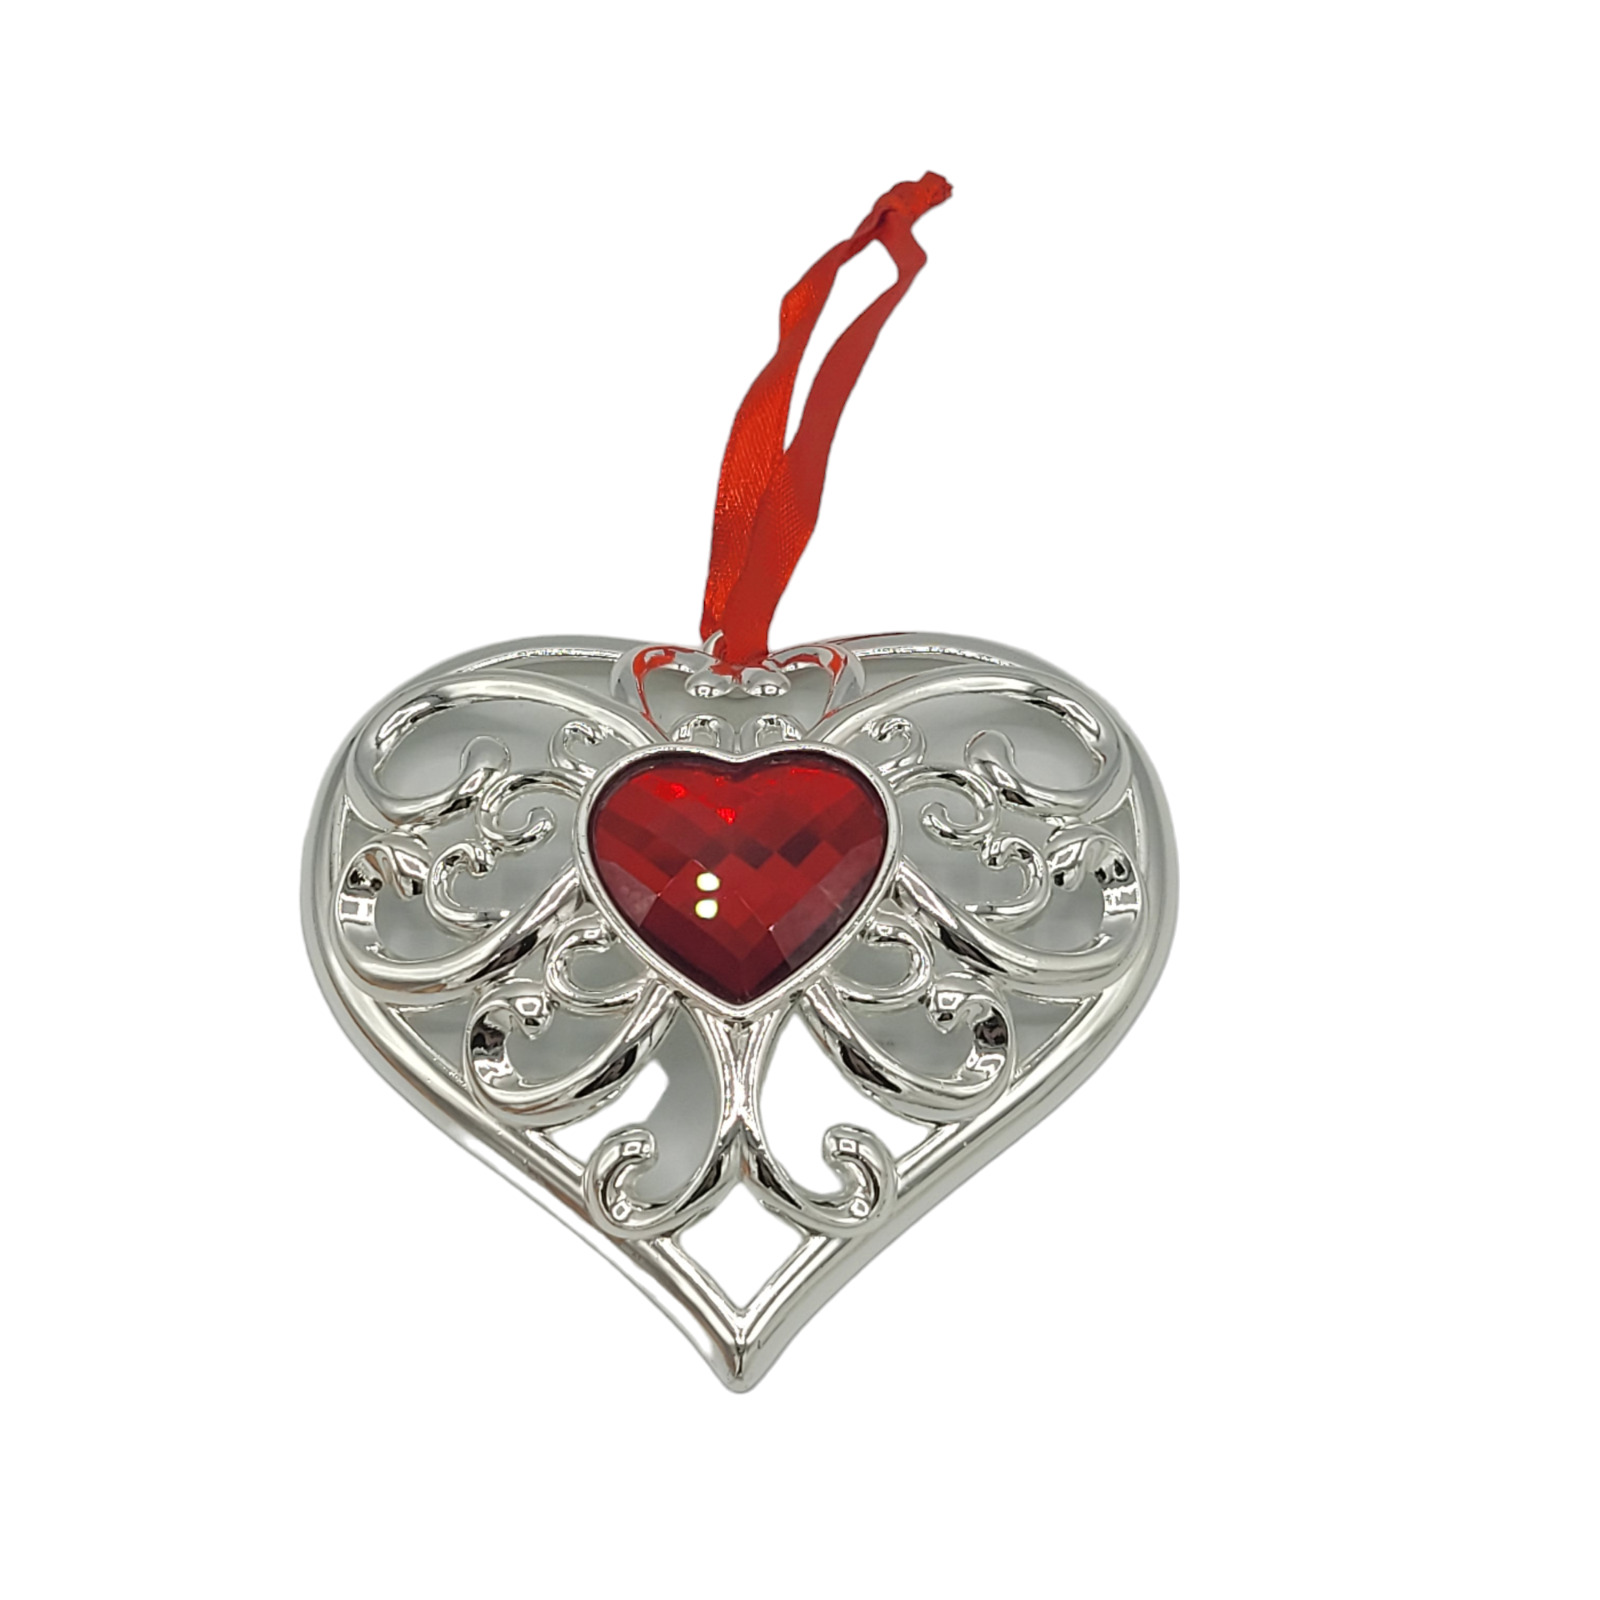 Lenox Bejeweled Heart Christmas Ornament Faceted Oval Crystal NIB 